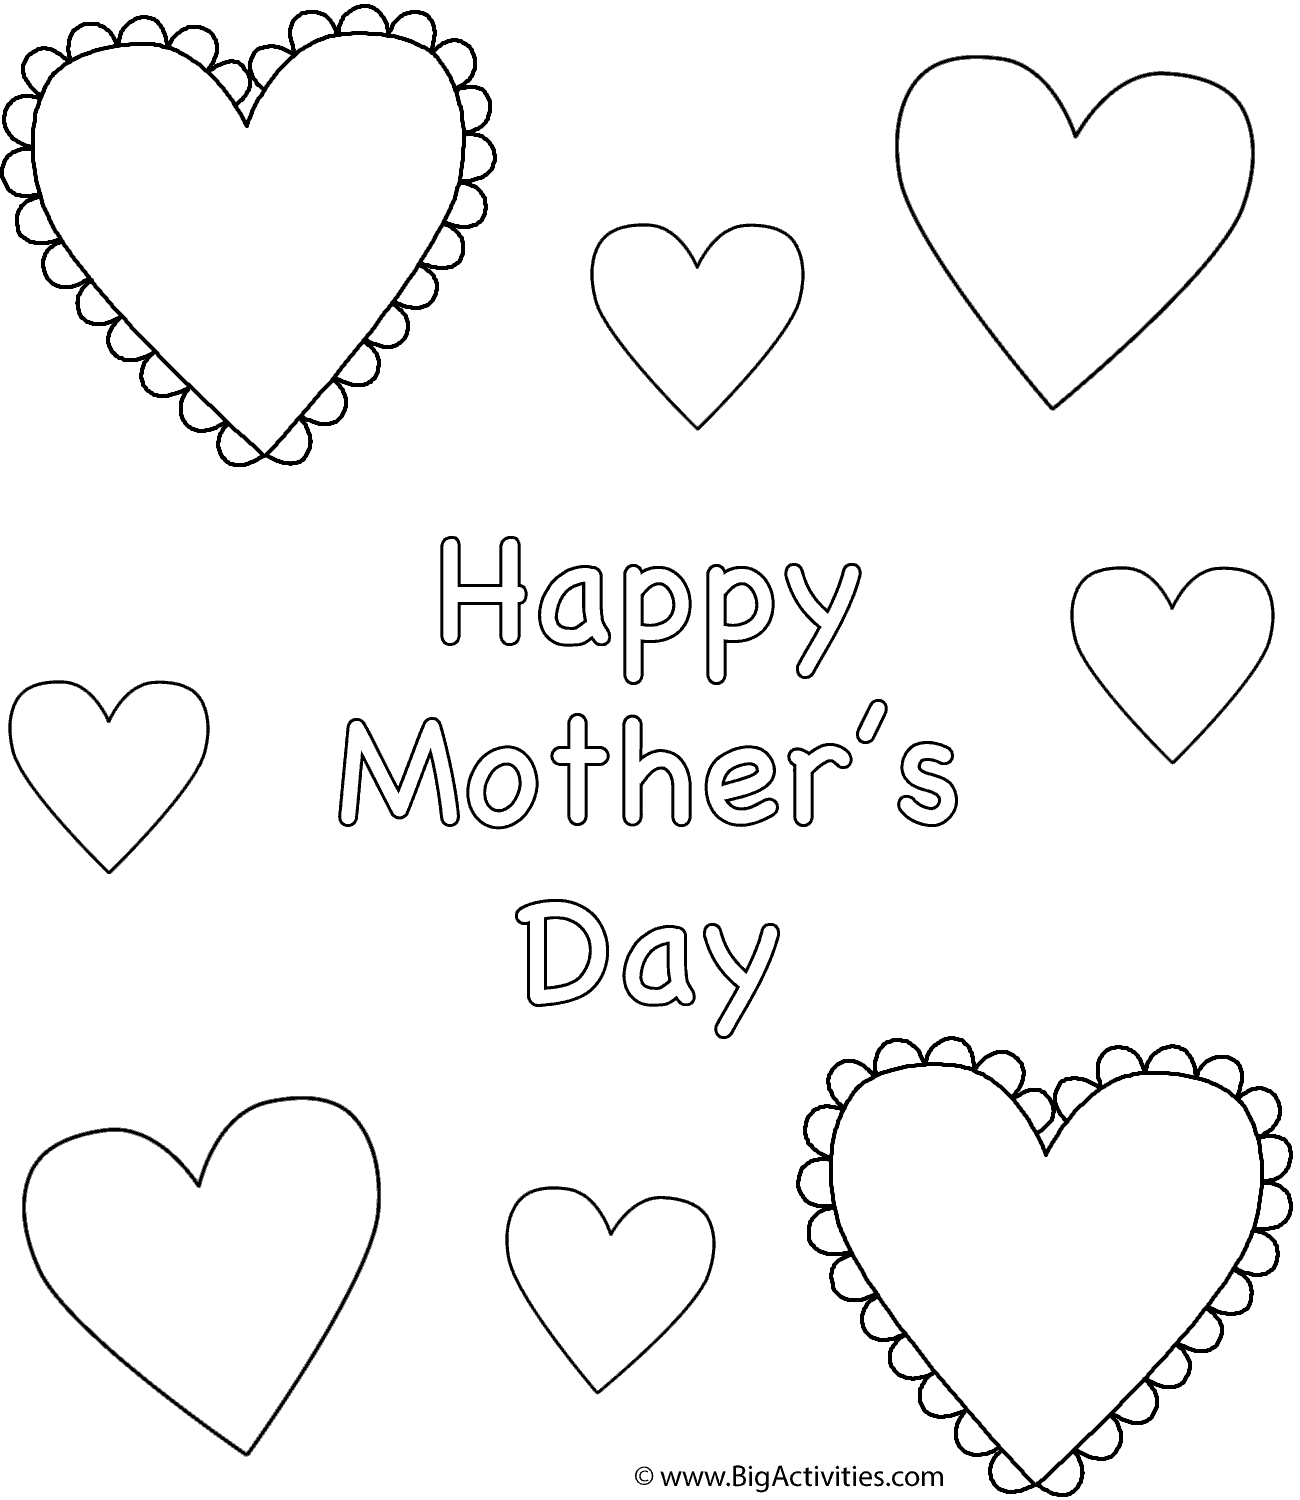 Eight Hearts - Coloring Page (Mother's Day)